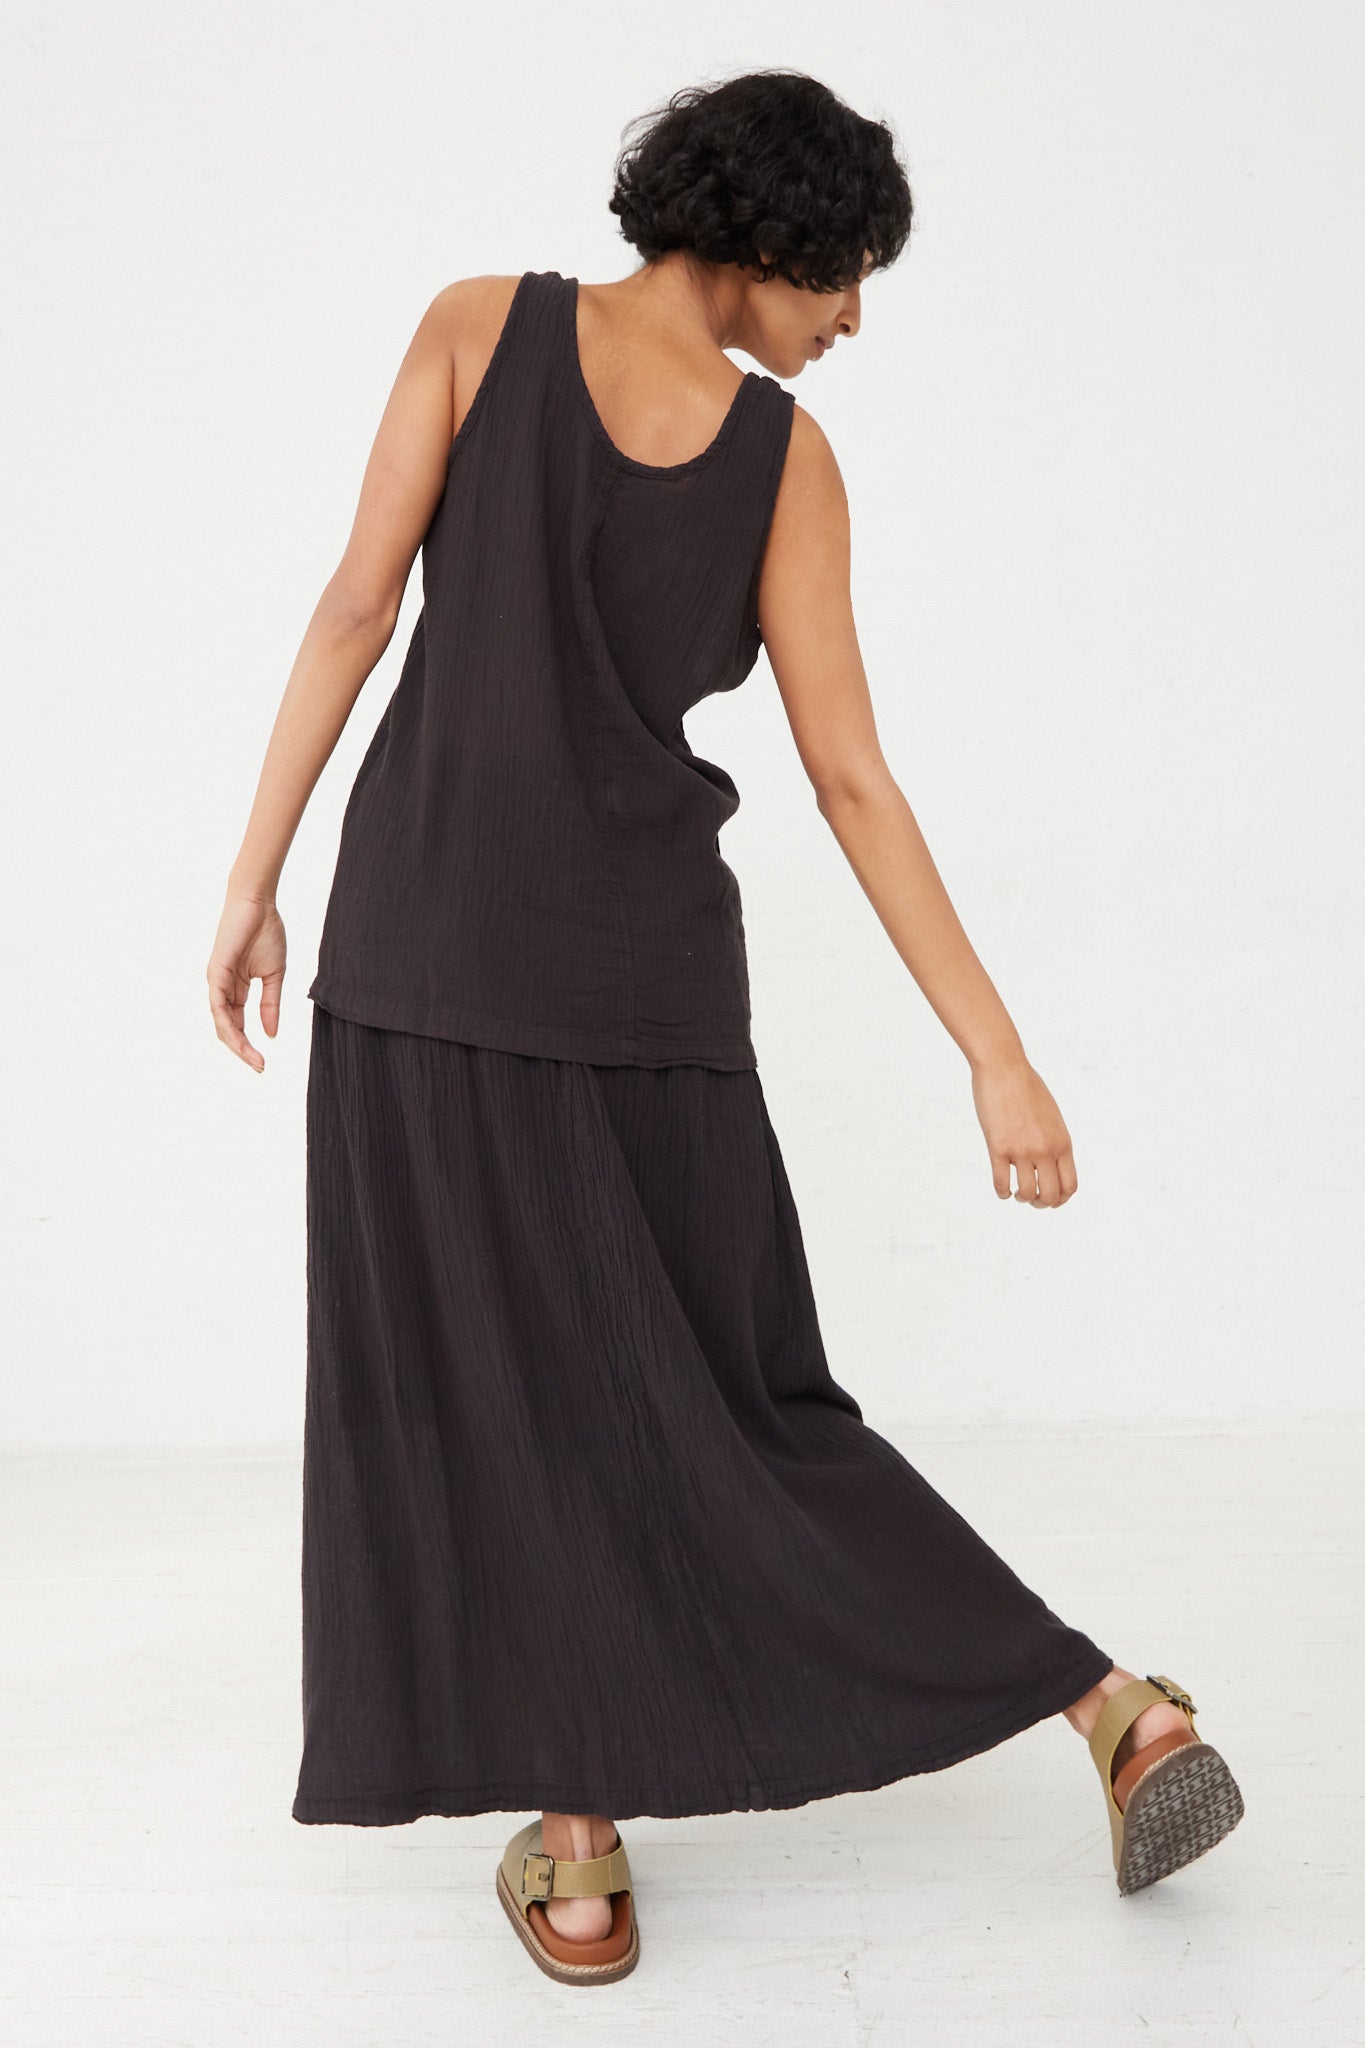 The back view of a woman wearing a Black Crane relaxed fit scoop neck tank top in Black. Full length.